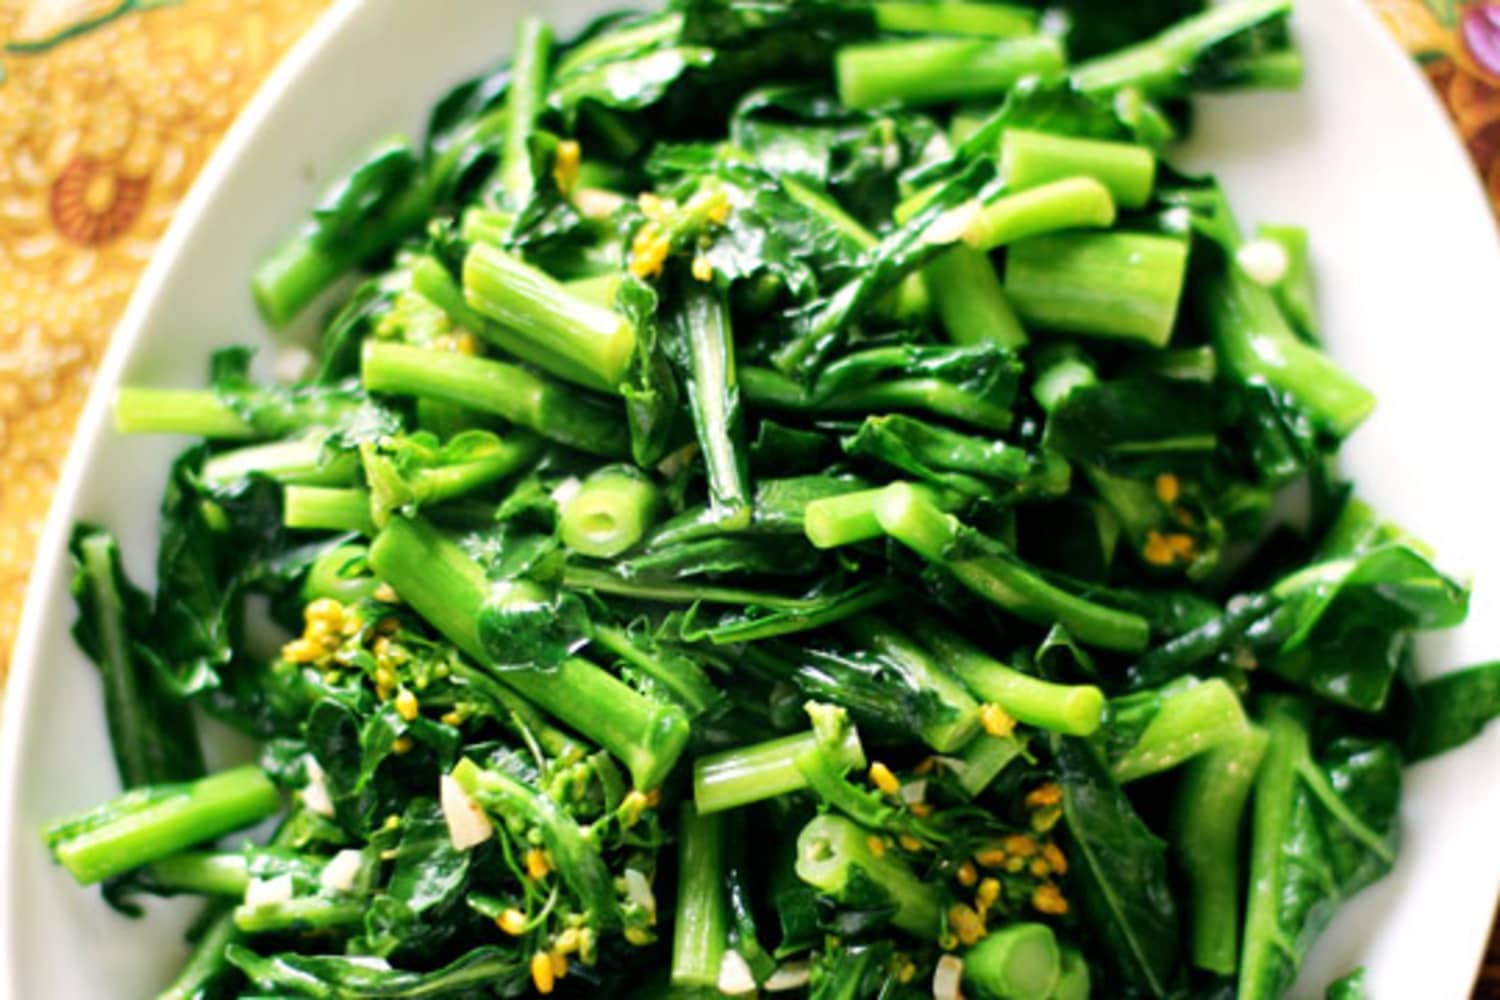 Leafy greens for side dishes